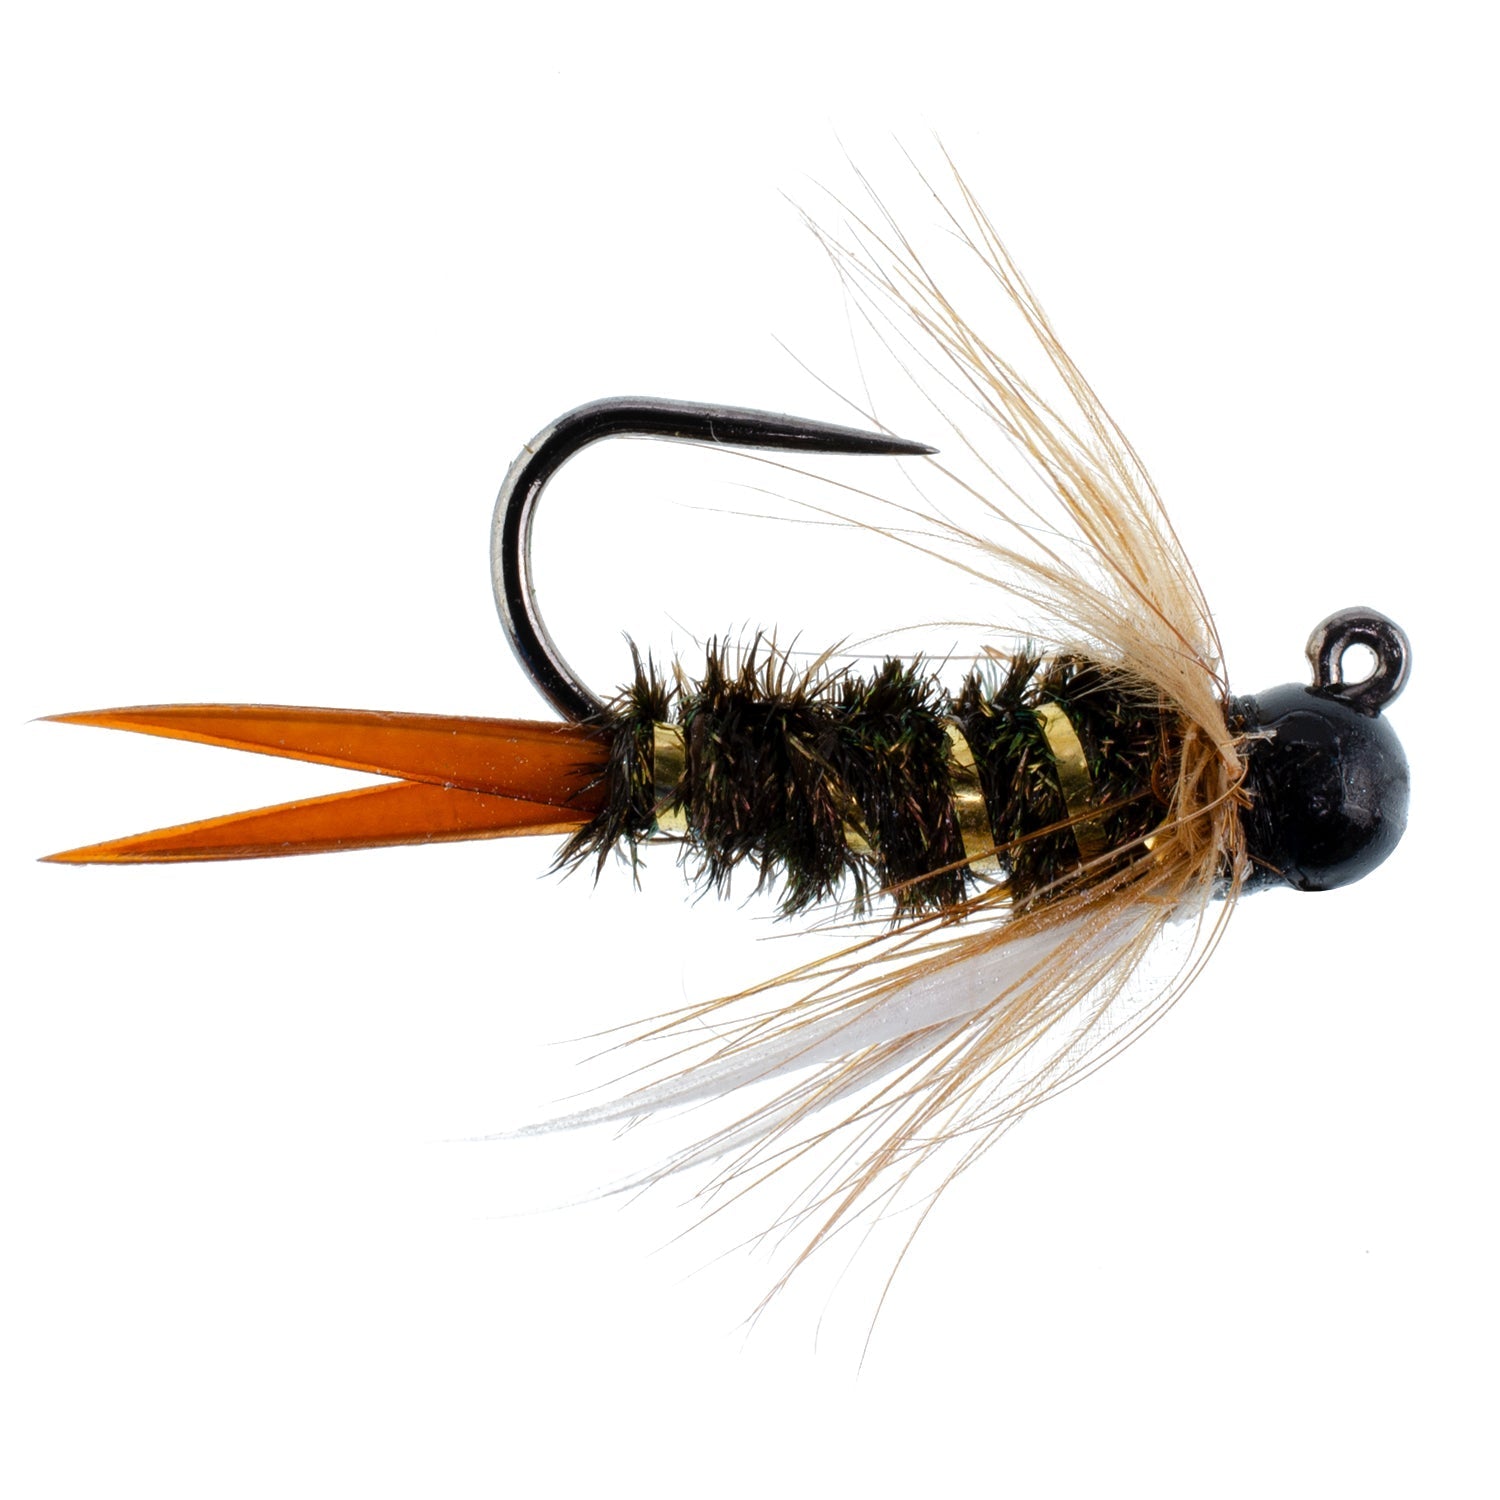 Black Tungsten Bead Prince Jig Tactical Czech Nymph Euro Nymphing Fly - 6 Flies Size 10